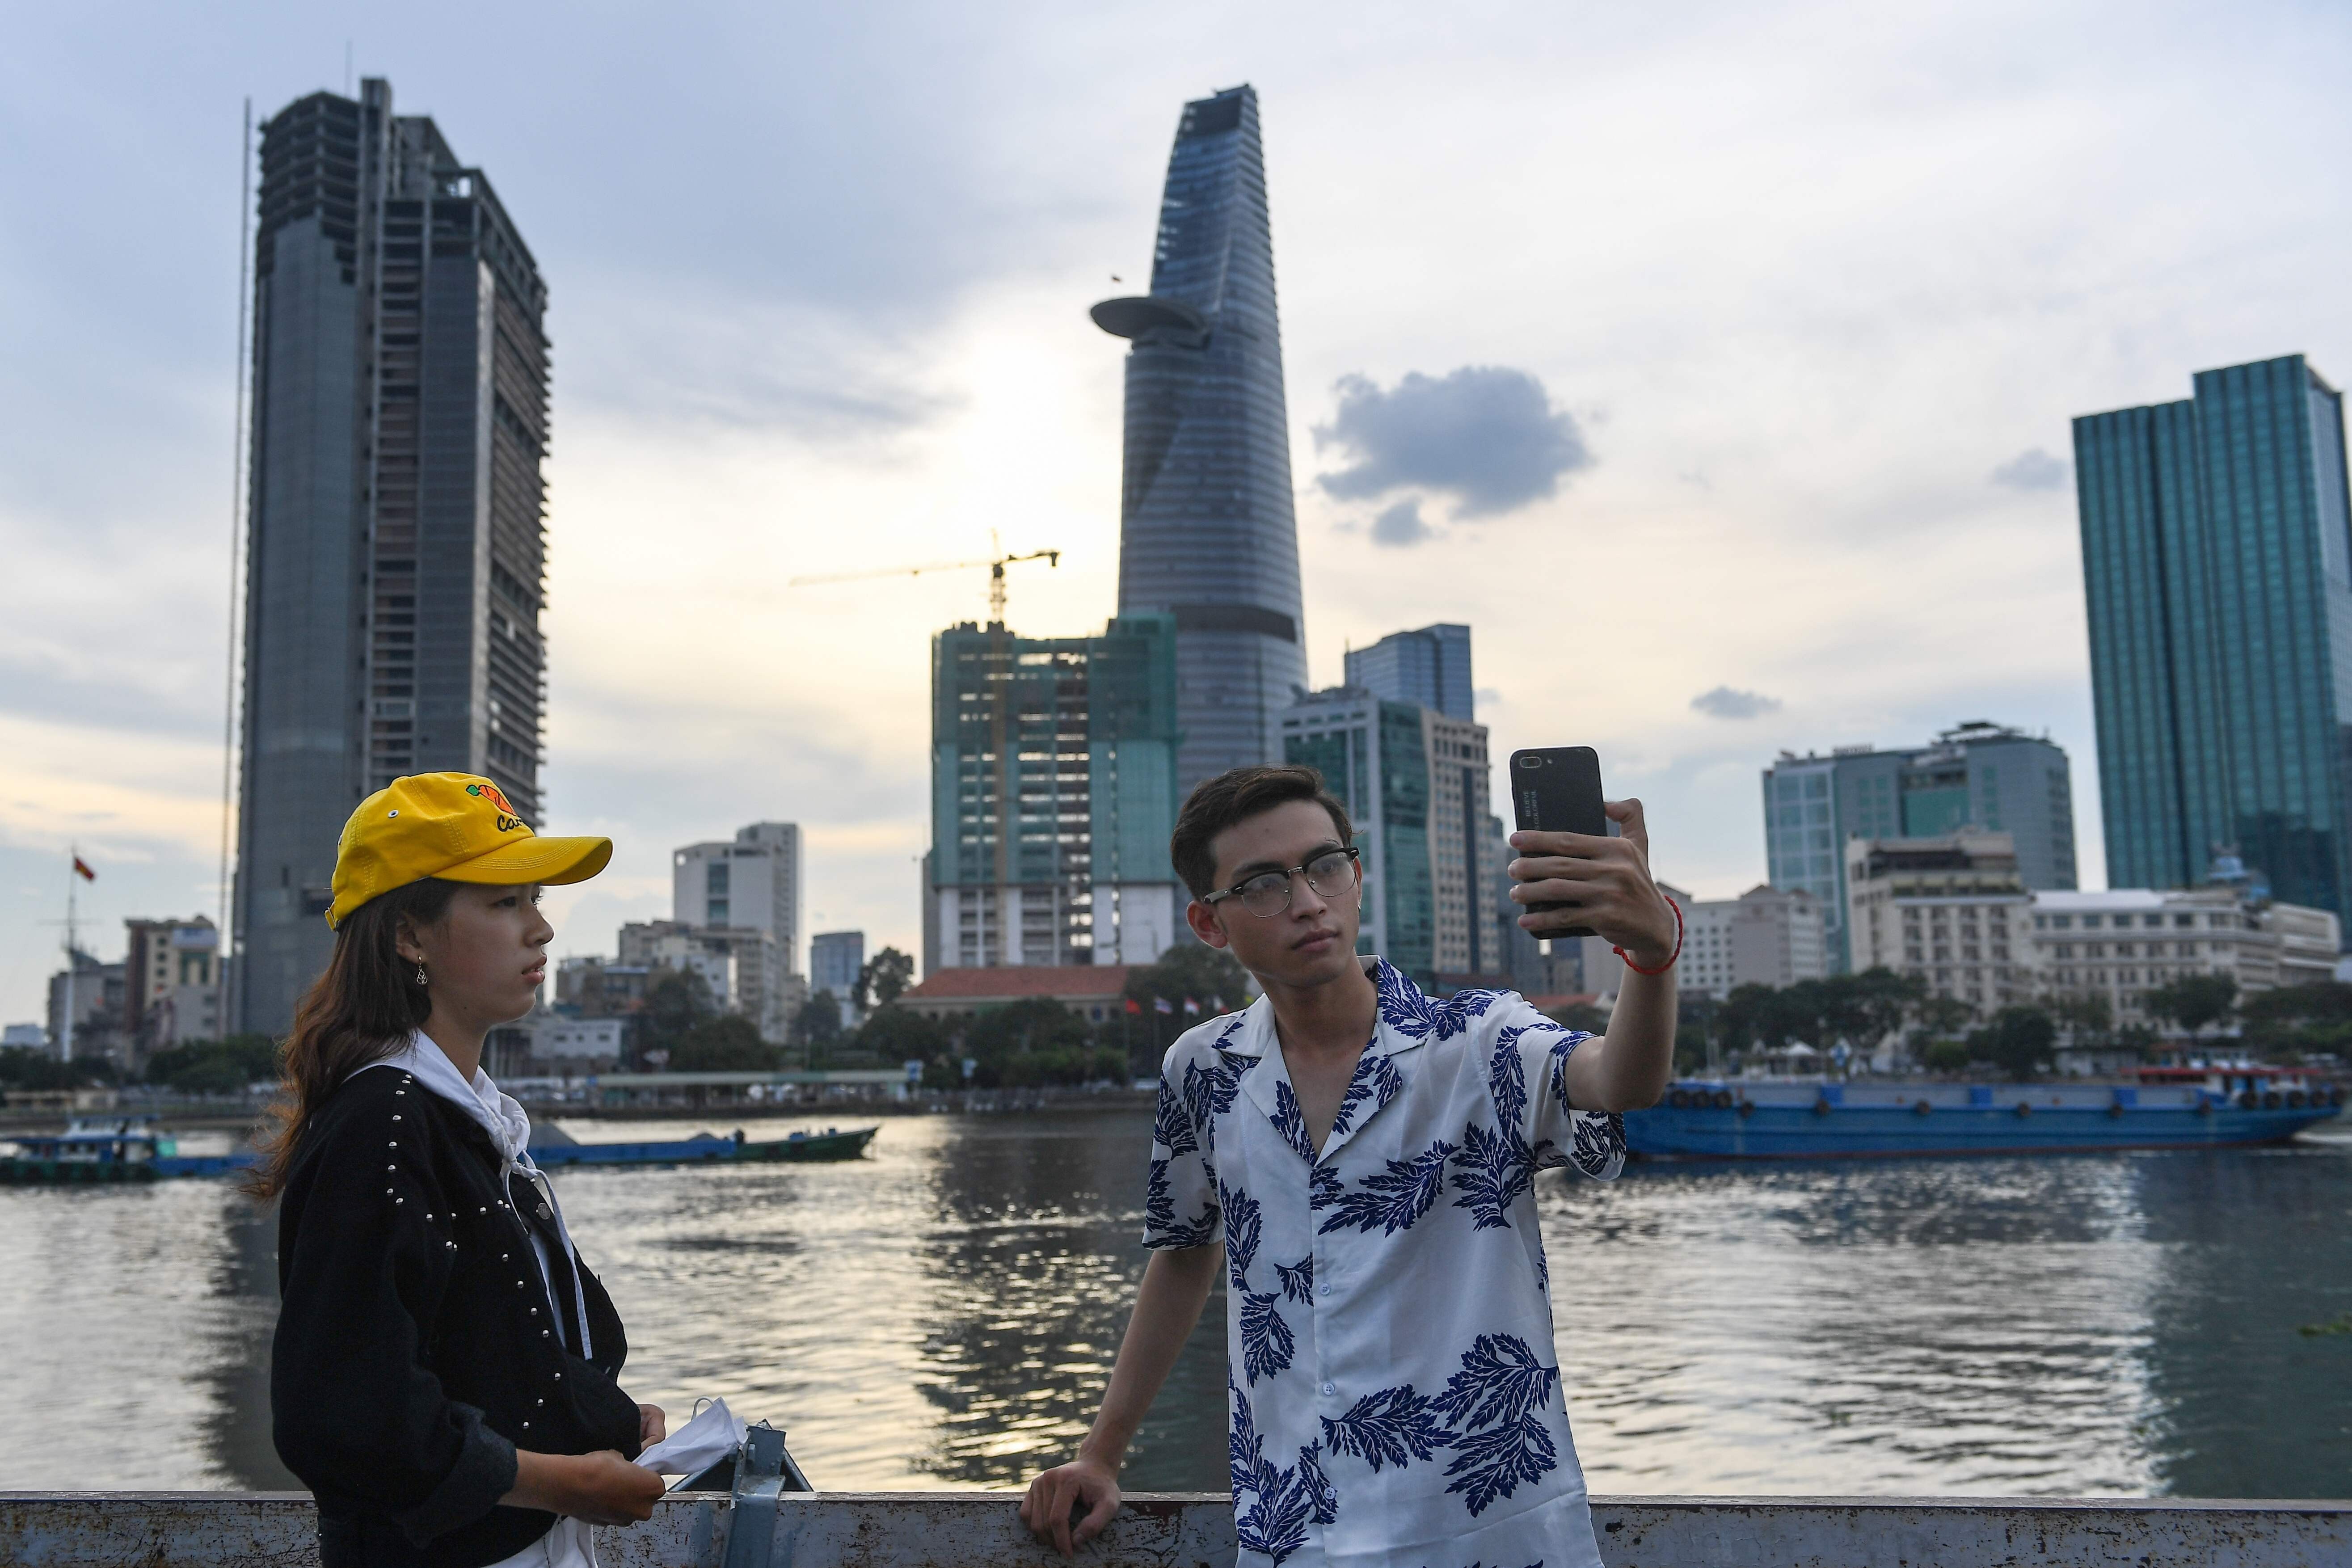 The Saigon river in Ho Chi Minh City. A luxury residential property being developed in the city by Hong Kong developer Swire Properties has ‘already received interest from expats in Vietnam, foreign and domestic investors, as well as end users’. Photo: AFP